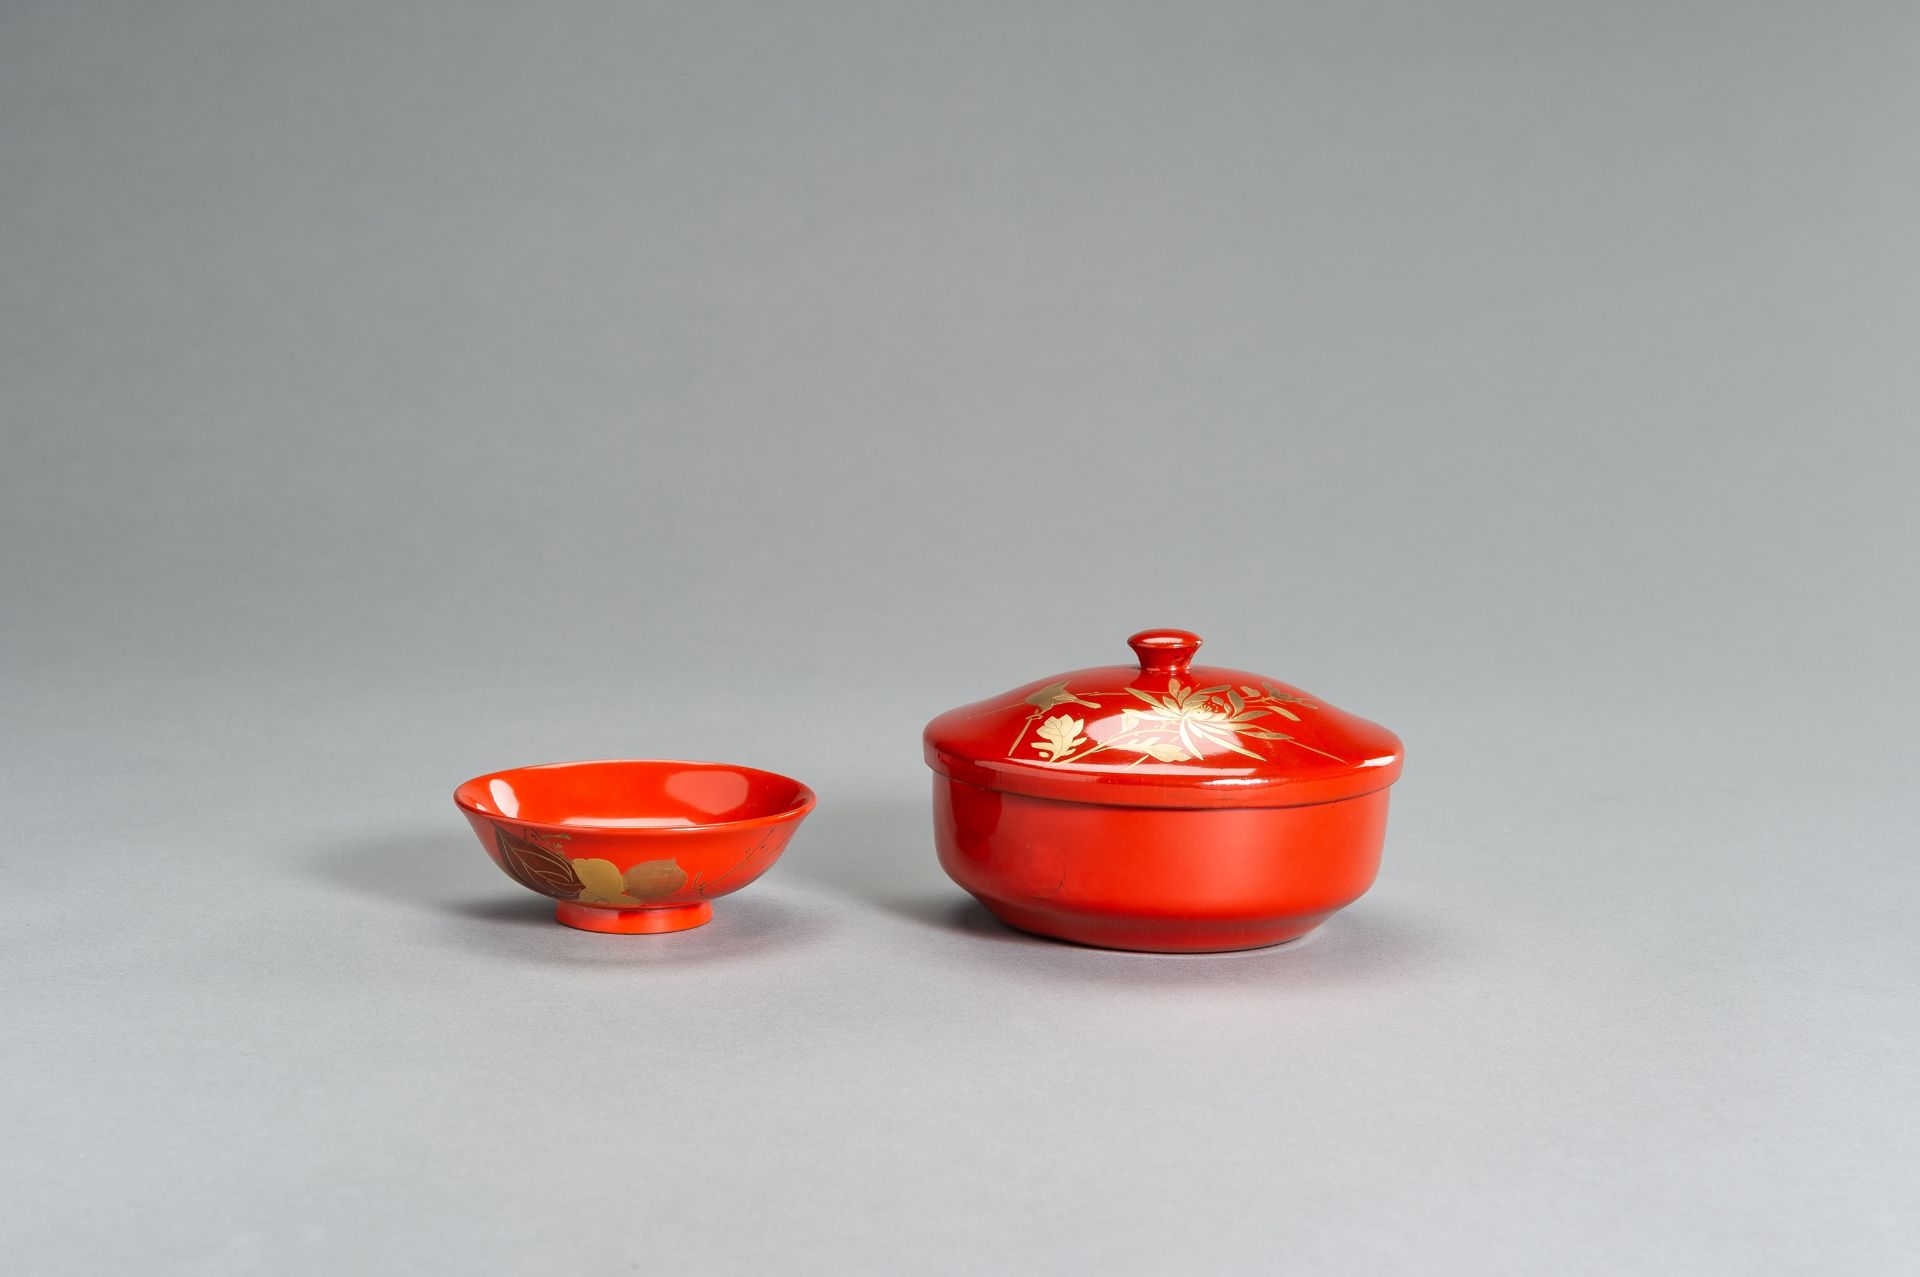 A RED LACQUER NIMONO WAN (BOWL WITH COVER) AND A SMALL KOBACHI (DISH) - Image 4 of 11